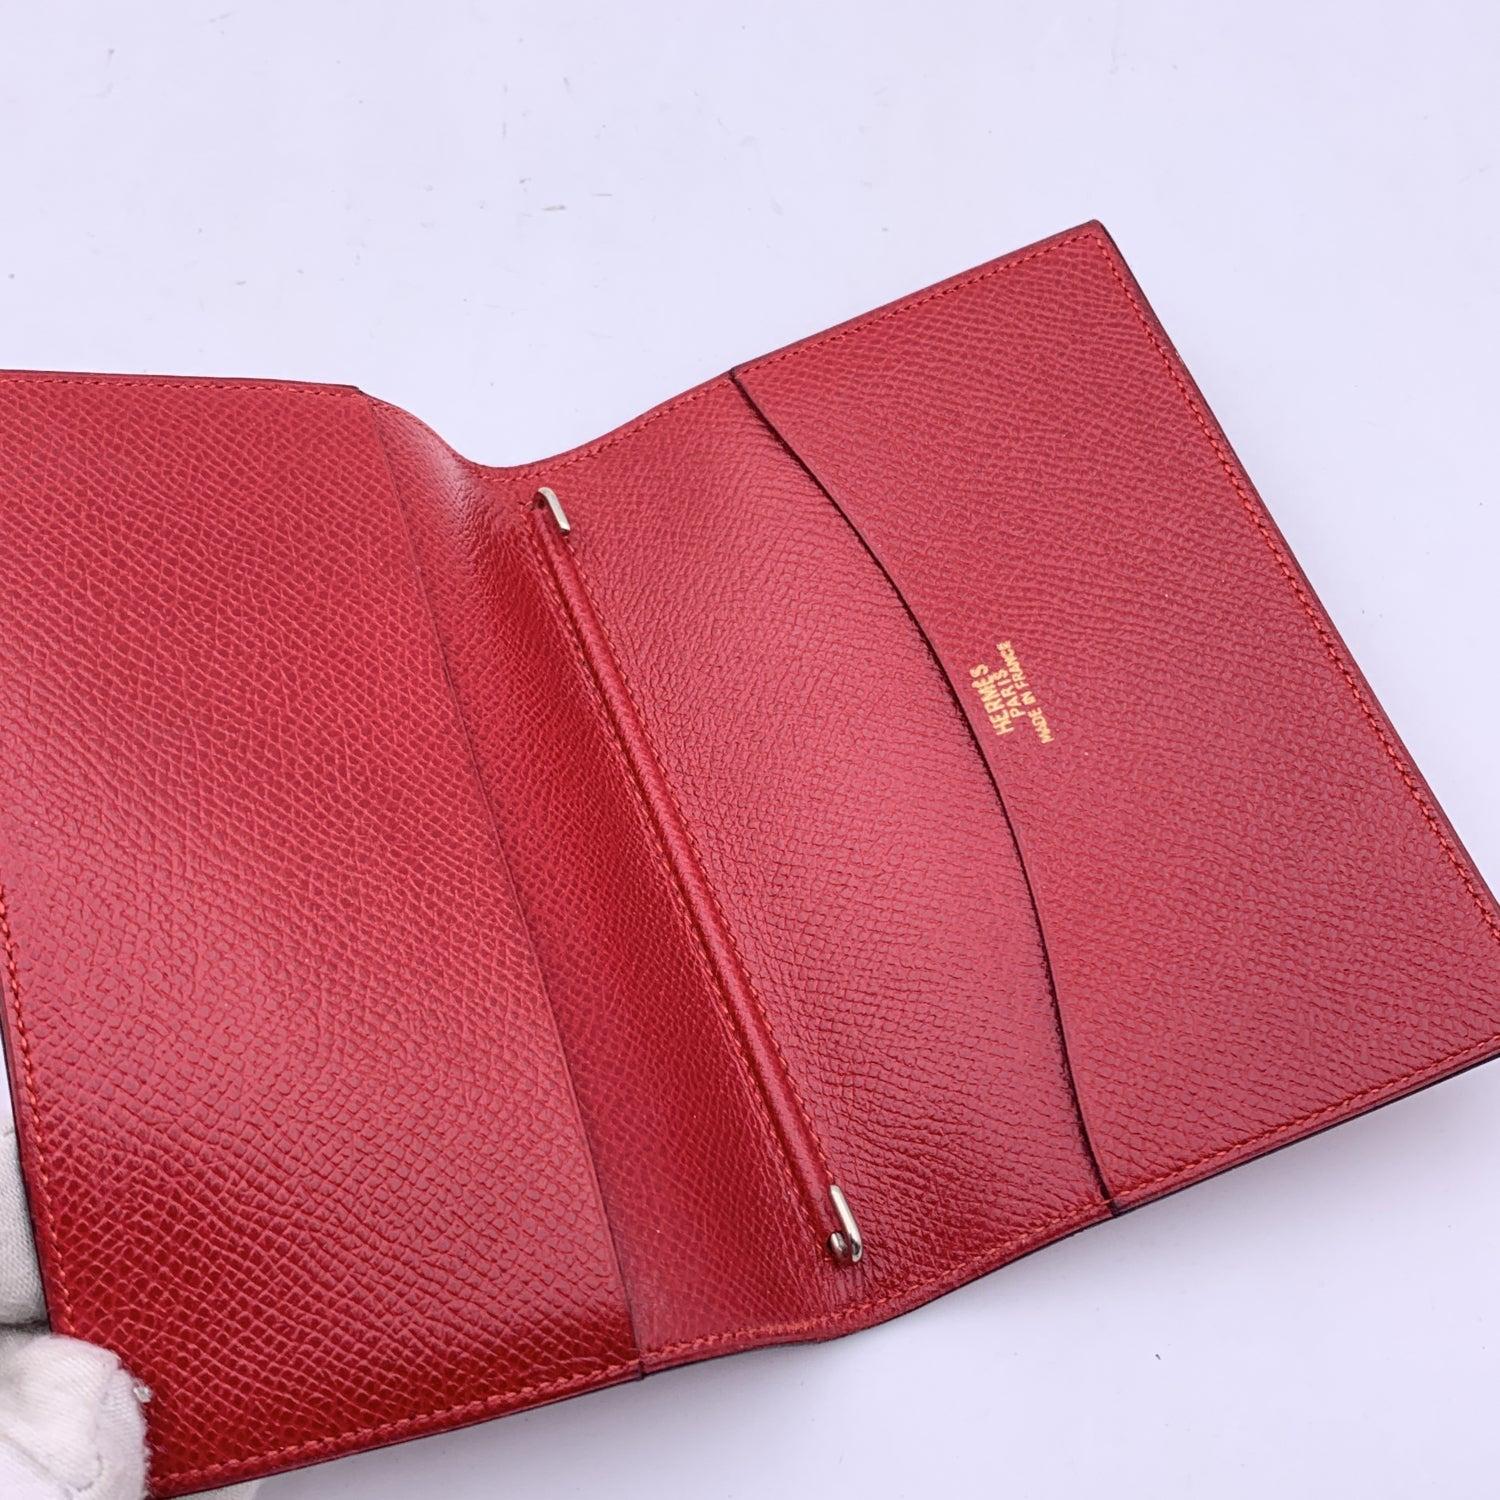 Women's or Men's Hermes Vintage Red Leather Simple Agenda Notebook Cover